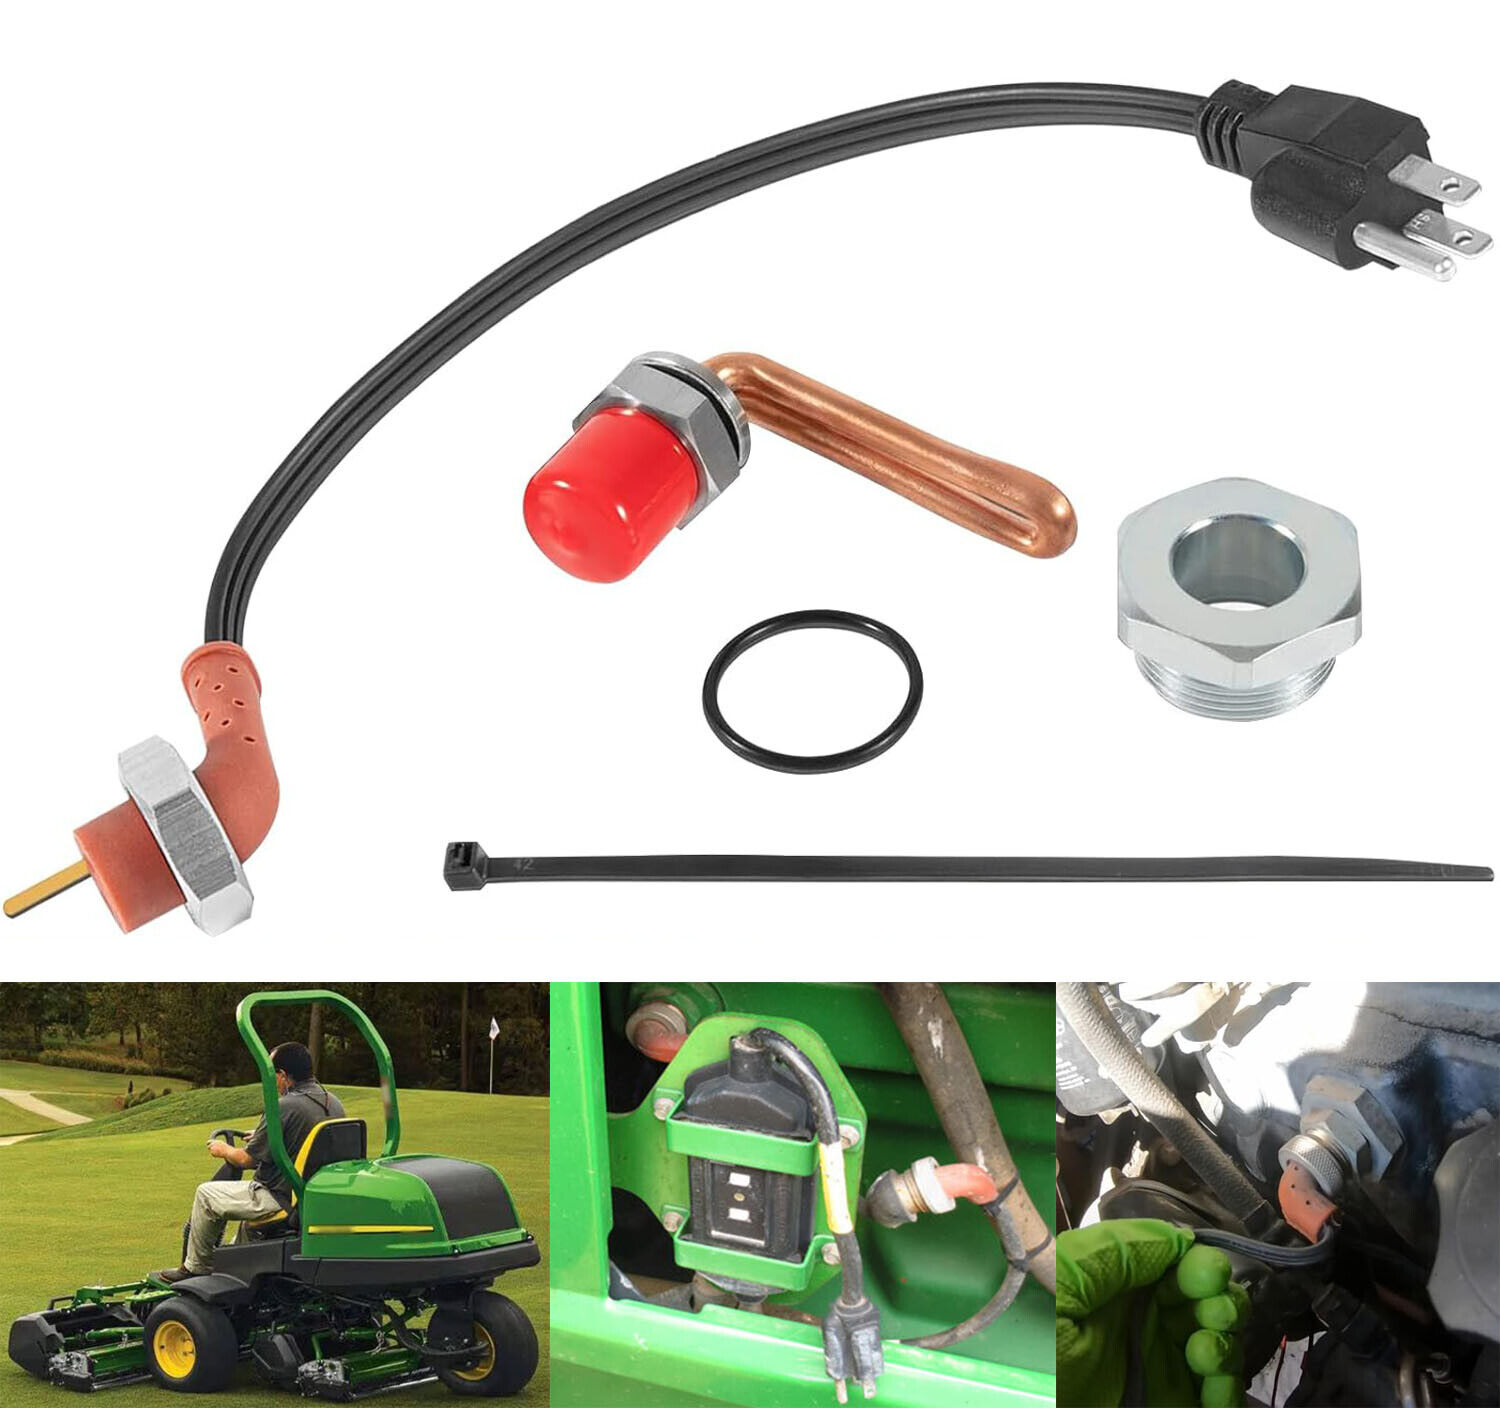 DZ102076 RE227949 Engine Block Heater Kit with Power Cord For John Deere Tractor